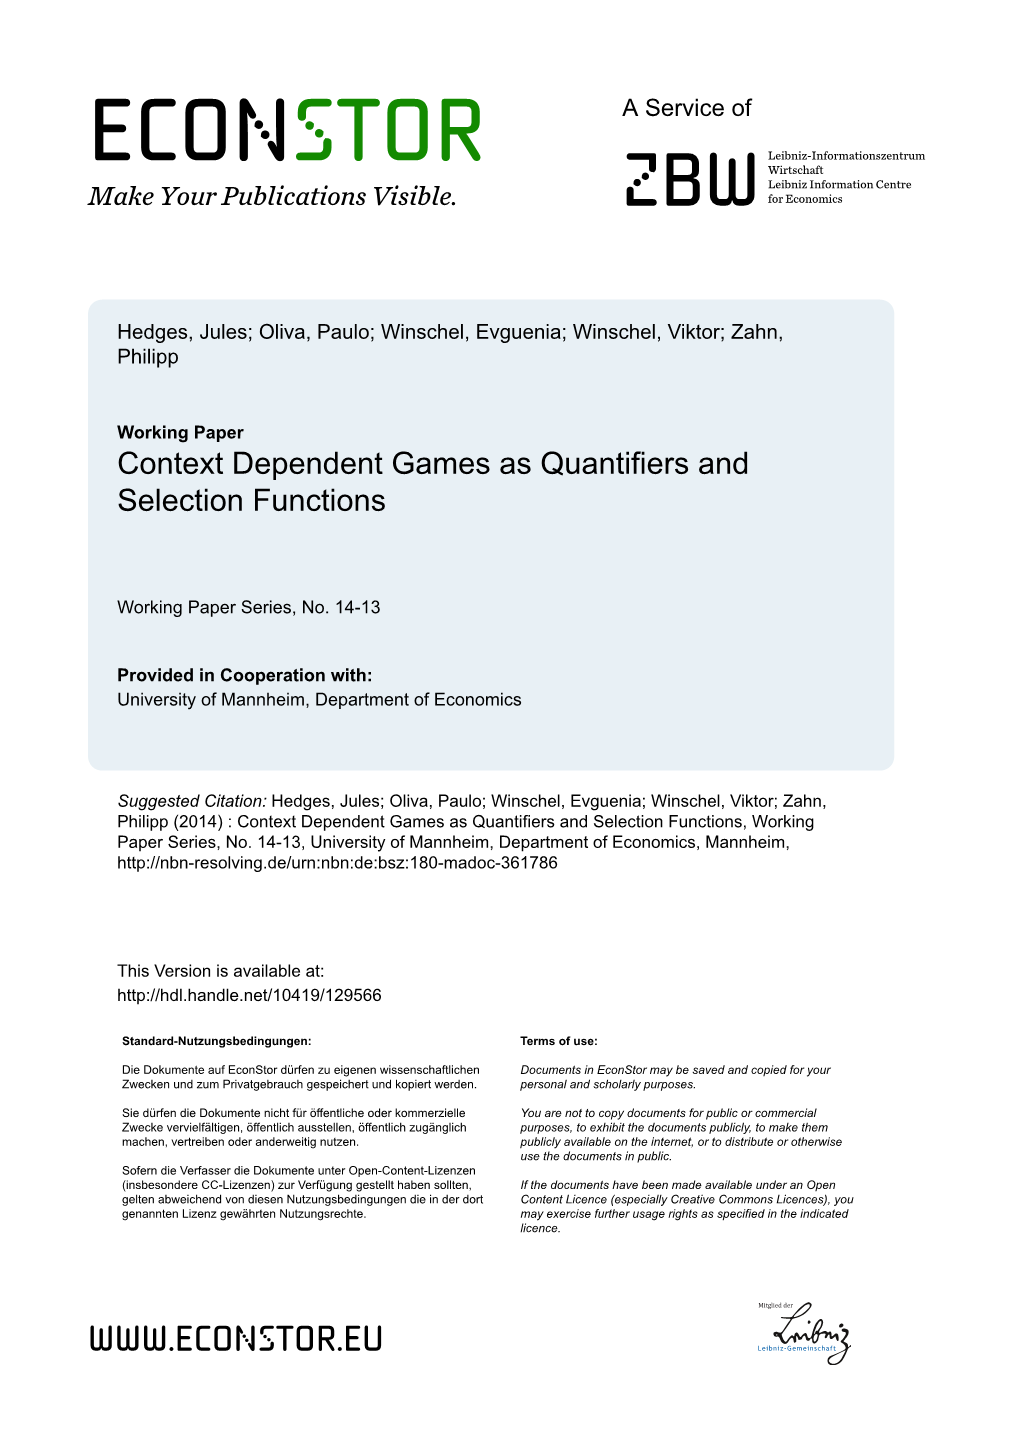 Context Dependent Games As Quantifiers and Selection Functions